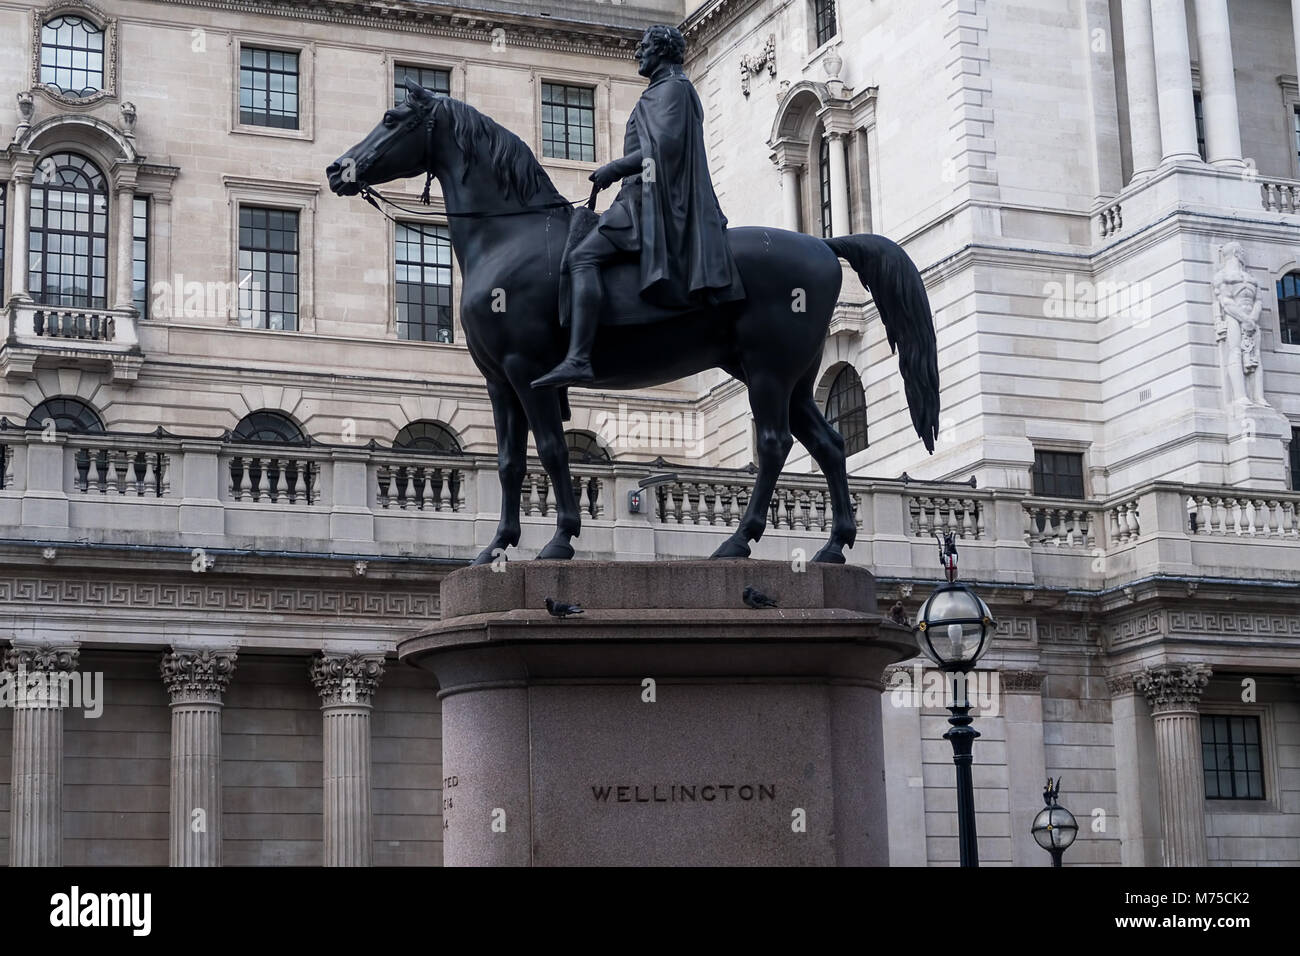 Equestrian statue of the Duke of Wellington, sculpted by Francis Leggatt Chantrey and Herbert William Weekes.  Located at Royal Exchange, London Stock Photo